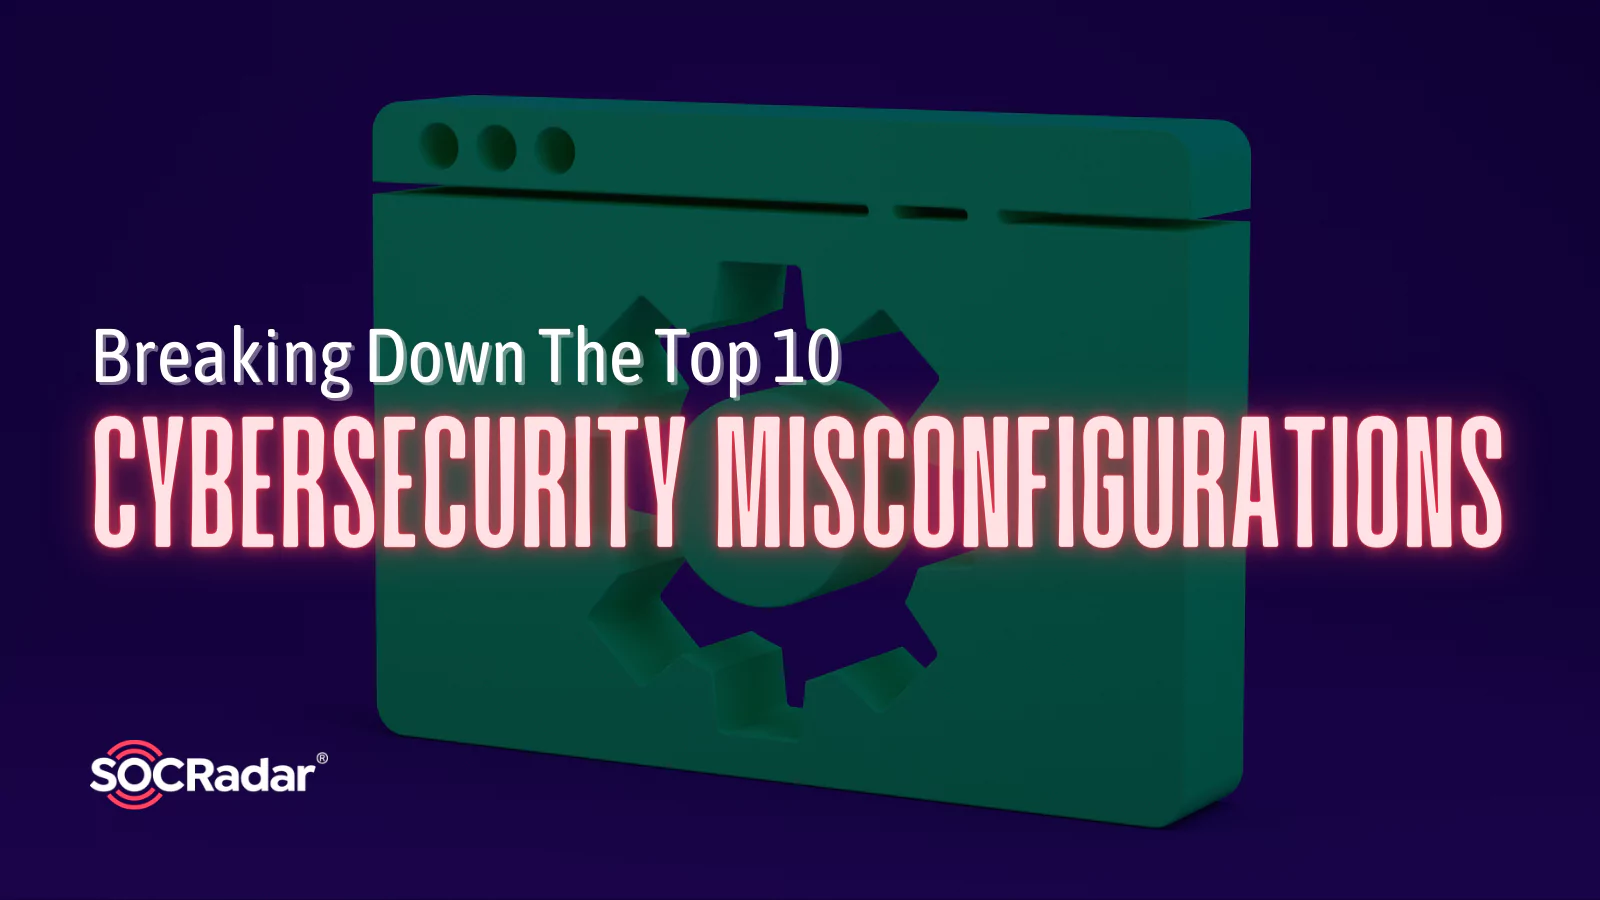 SOCRadar® Cyber Intelligence Inc. | Breaking Down the Top 10 Cybersecurity Misconfigurations by NSA and CISA